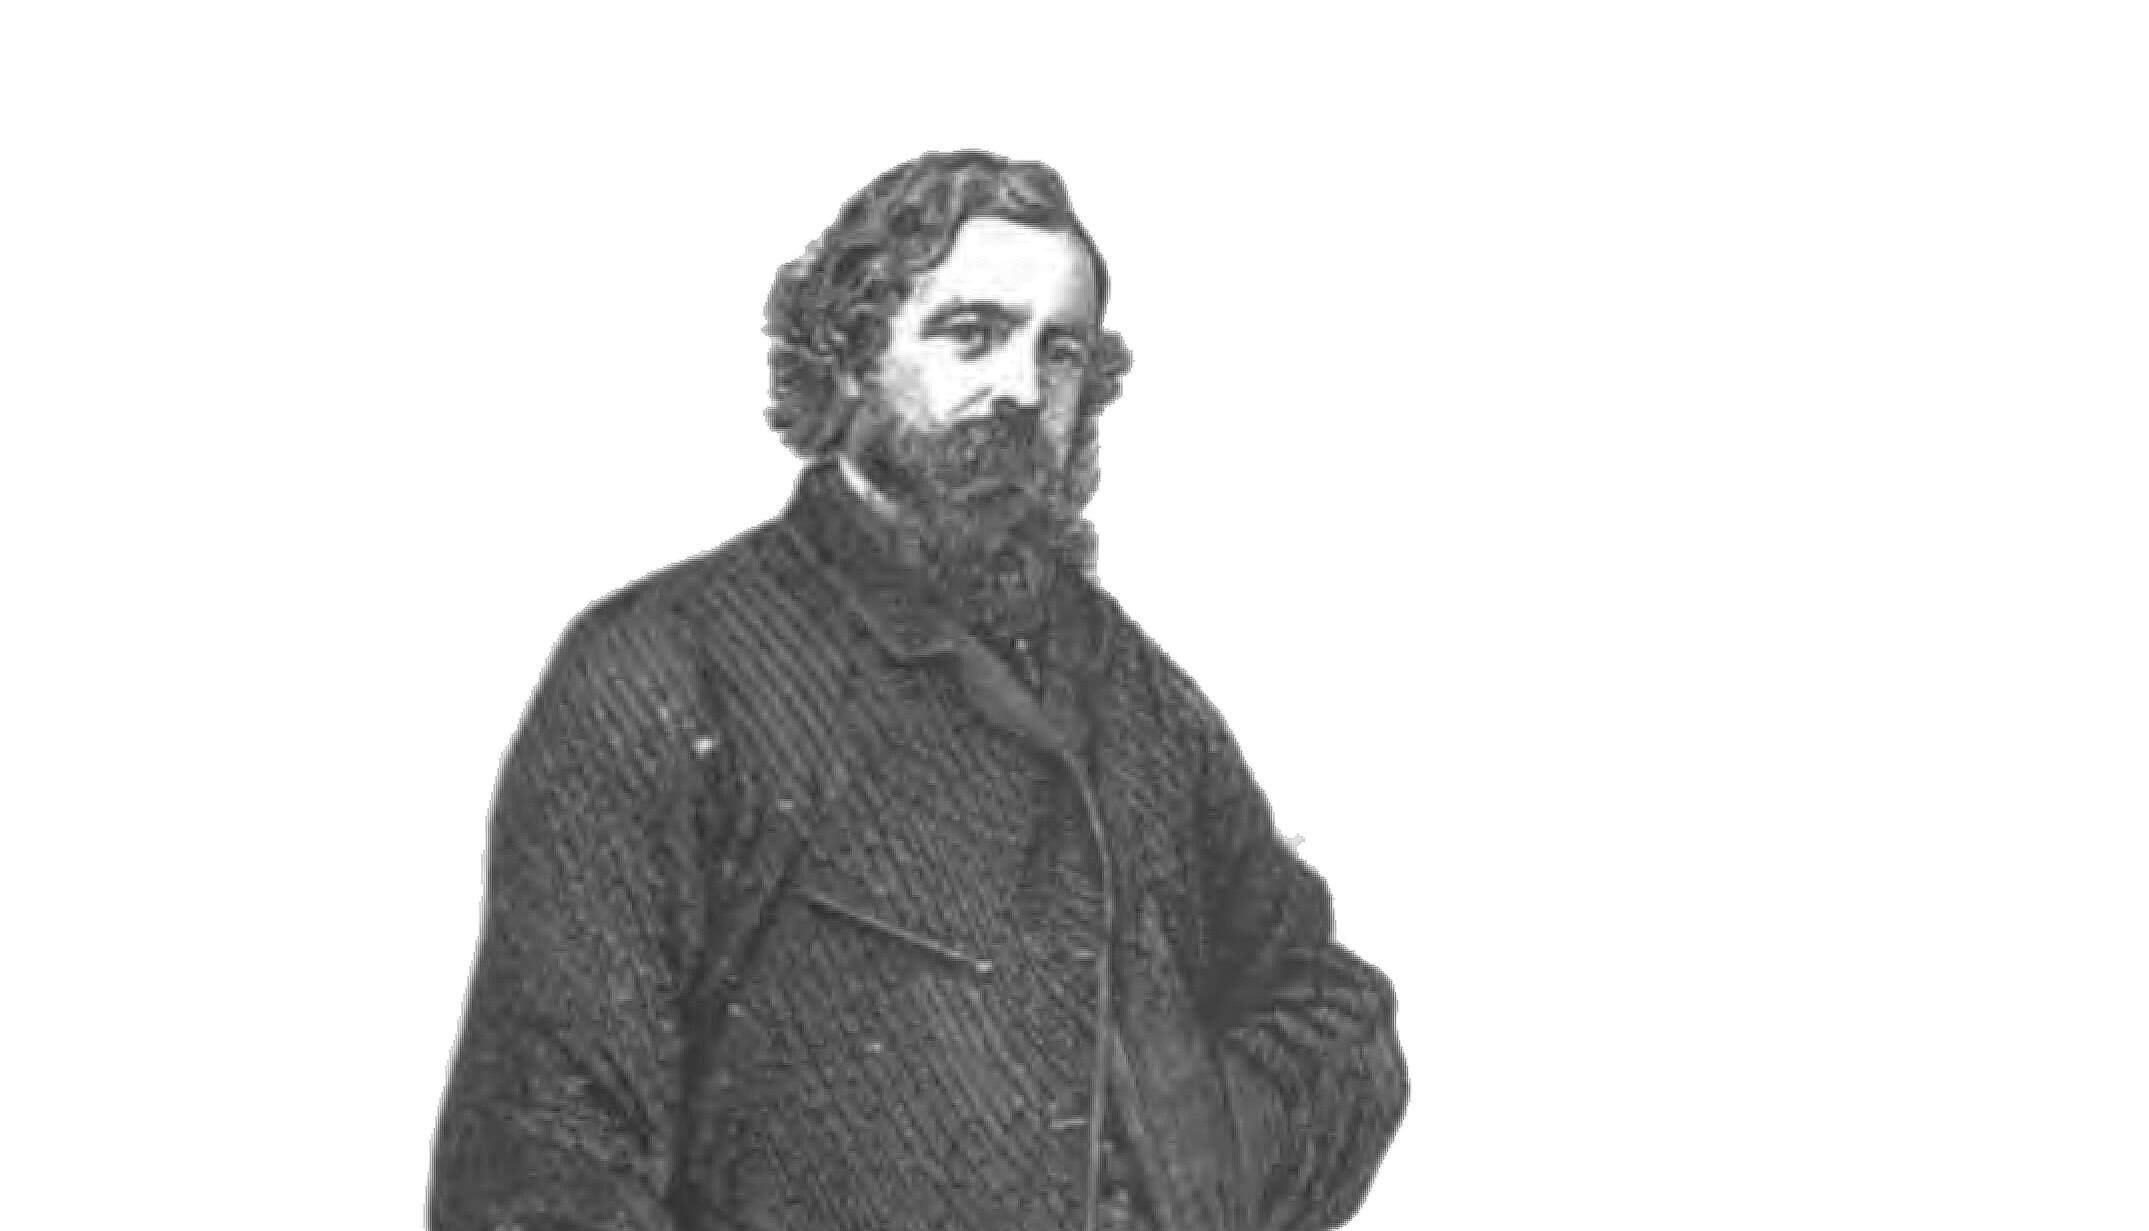 Engraving of author Henry Morford